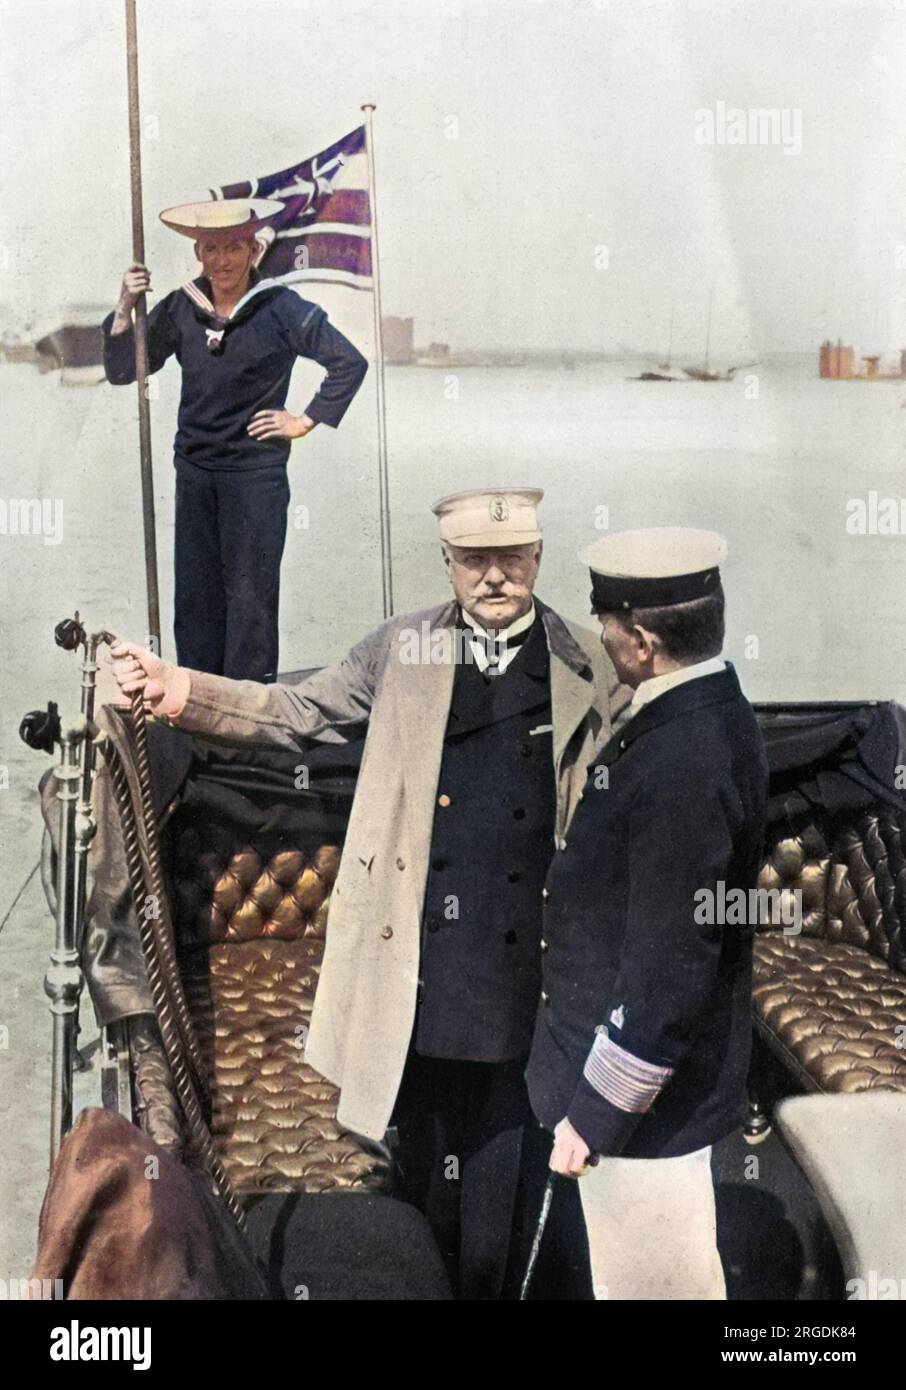 Prince Bernhard von Bulow (1849 - 1929), German Chancellor from 1900 - 1909, pictured with the Kaiser on the Hohenzollern (the Kaiser's yacht) shortly before his departure from office.  He was succeeded by Bethmann-Hollweg as Chancellor. Stock Photo